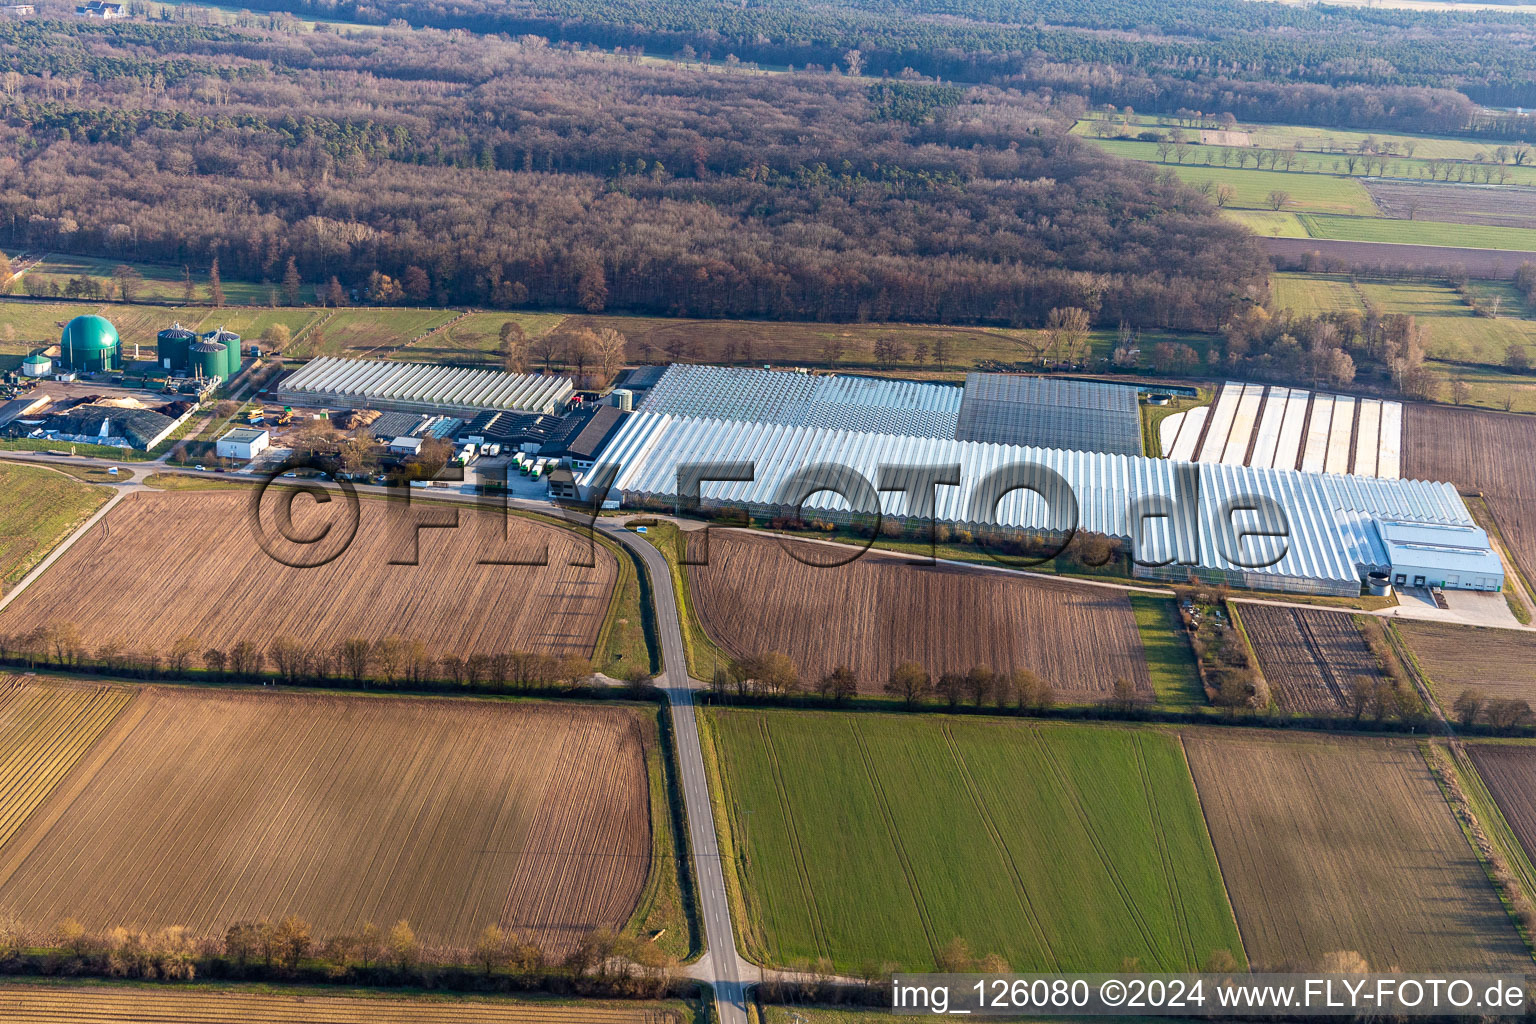 Rudolf Sinn Young Plants GmbH in Lustadt in the state Rhineland-Palatinate, Germany from above